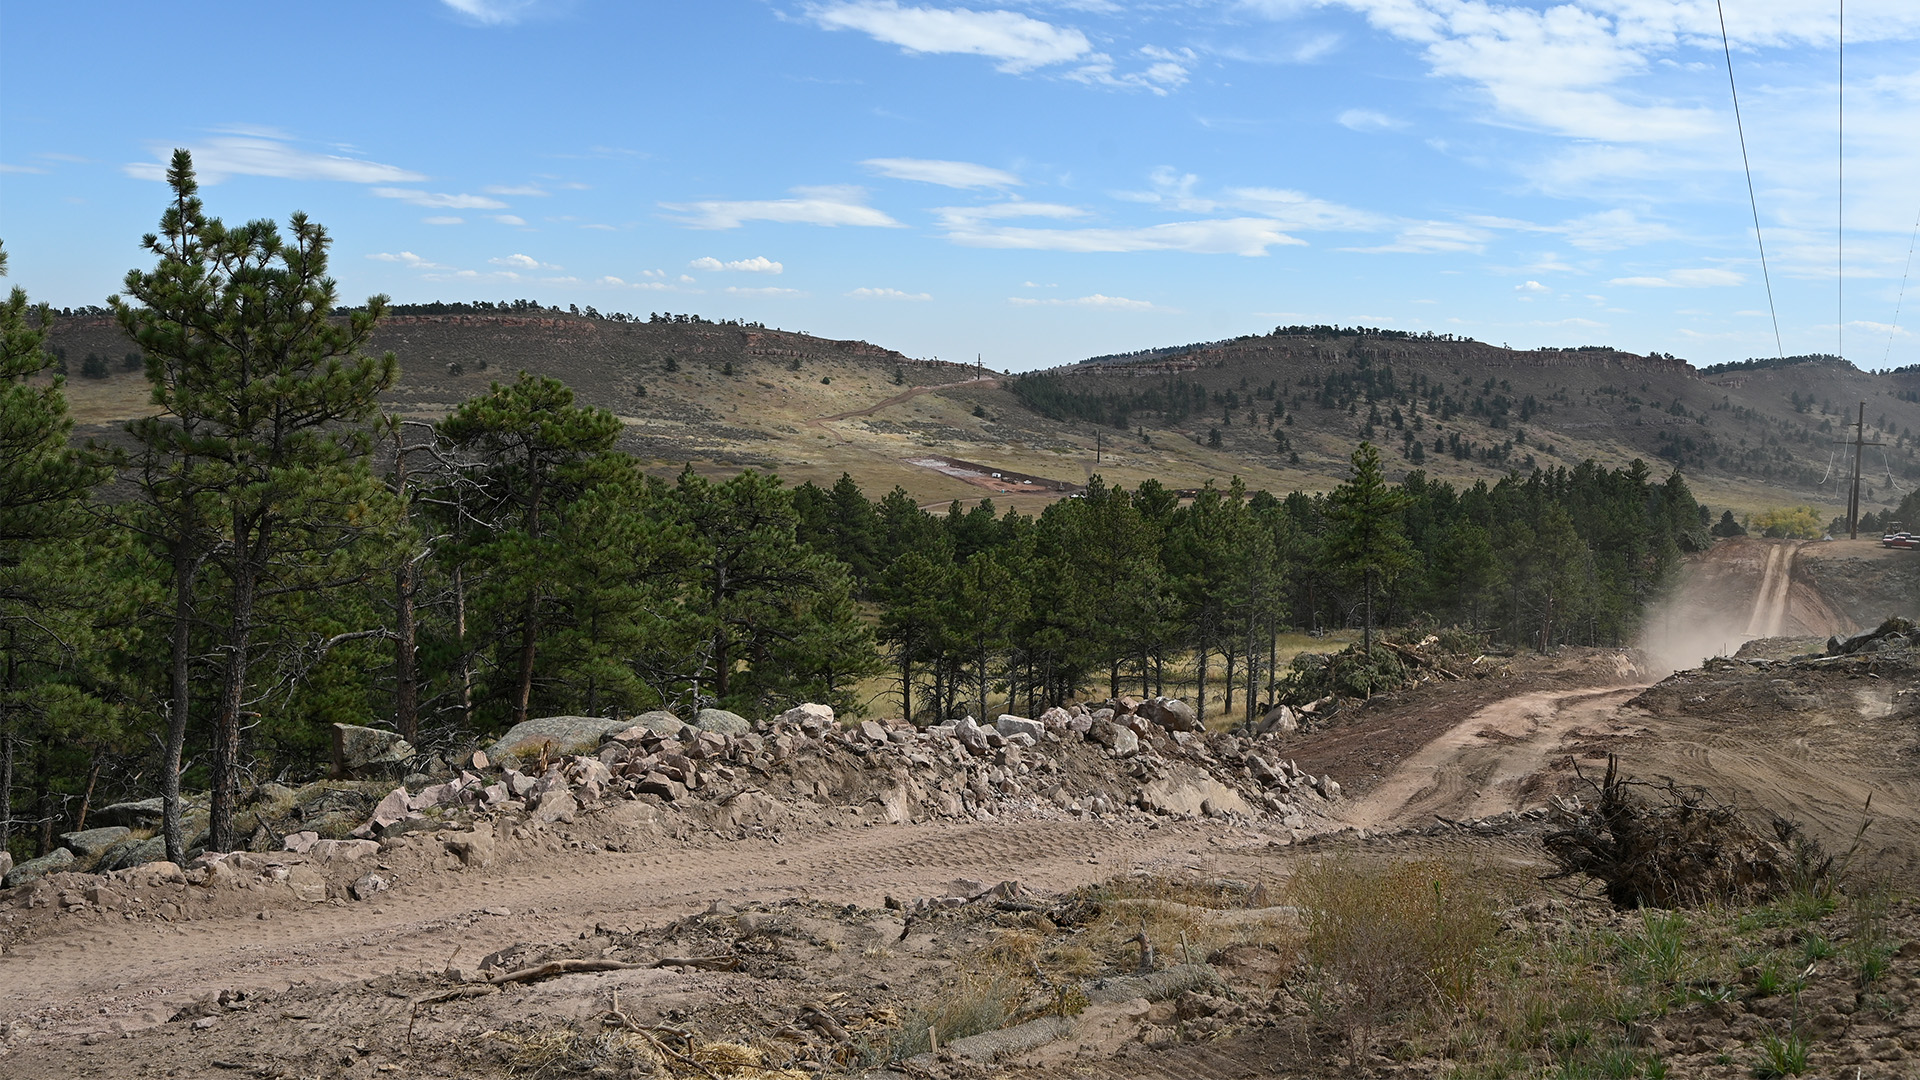 Construction of the saddle dam access road.